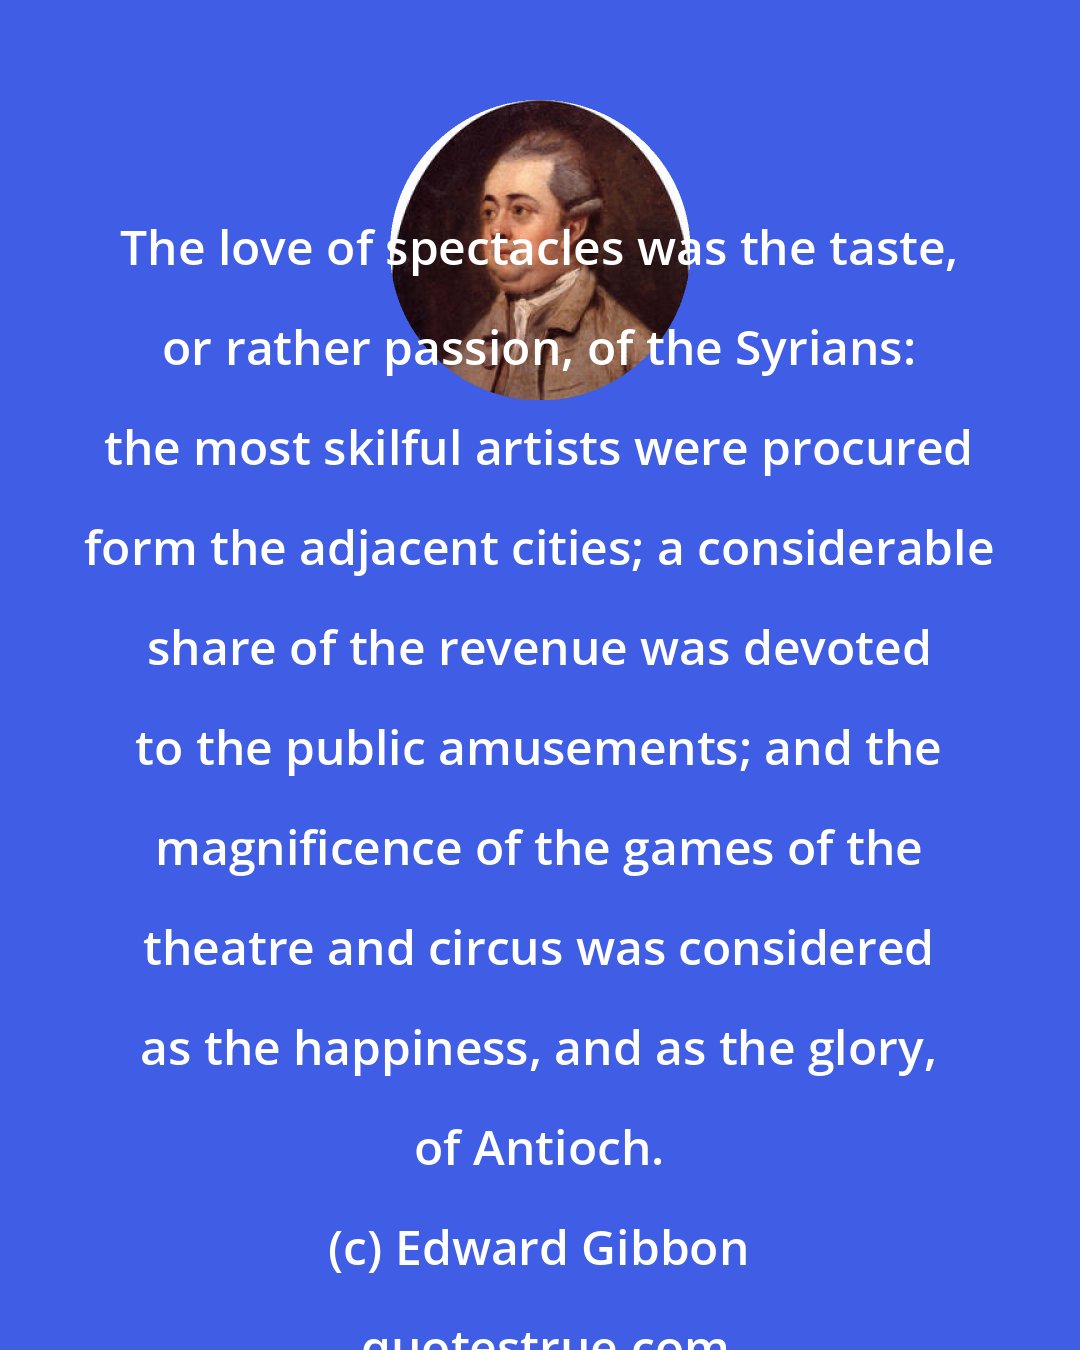 Edward Gibbon: The love of spectacles was the taste, or rather passion, of the Syrians: the most skilful artists were procured form the adjacent cities; a considerable share of the revenue was devoted to the public amusements; and the magnificence of the games of the theatre and circus was considered as the happiness, and as the glory, of Antioch.